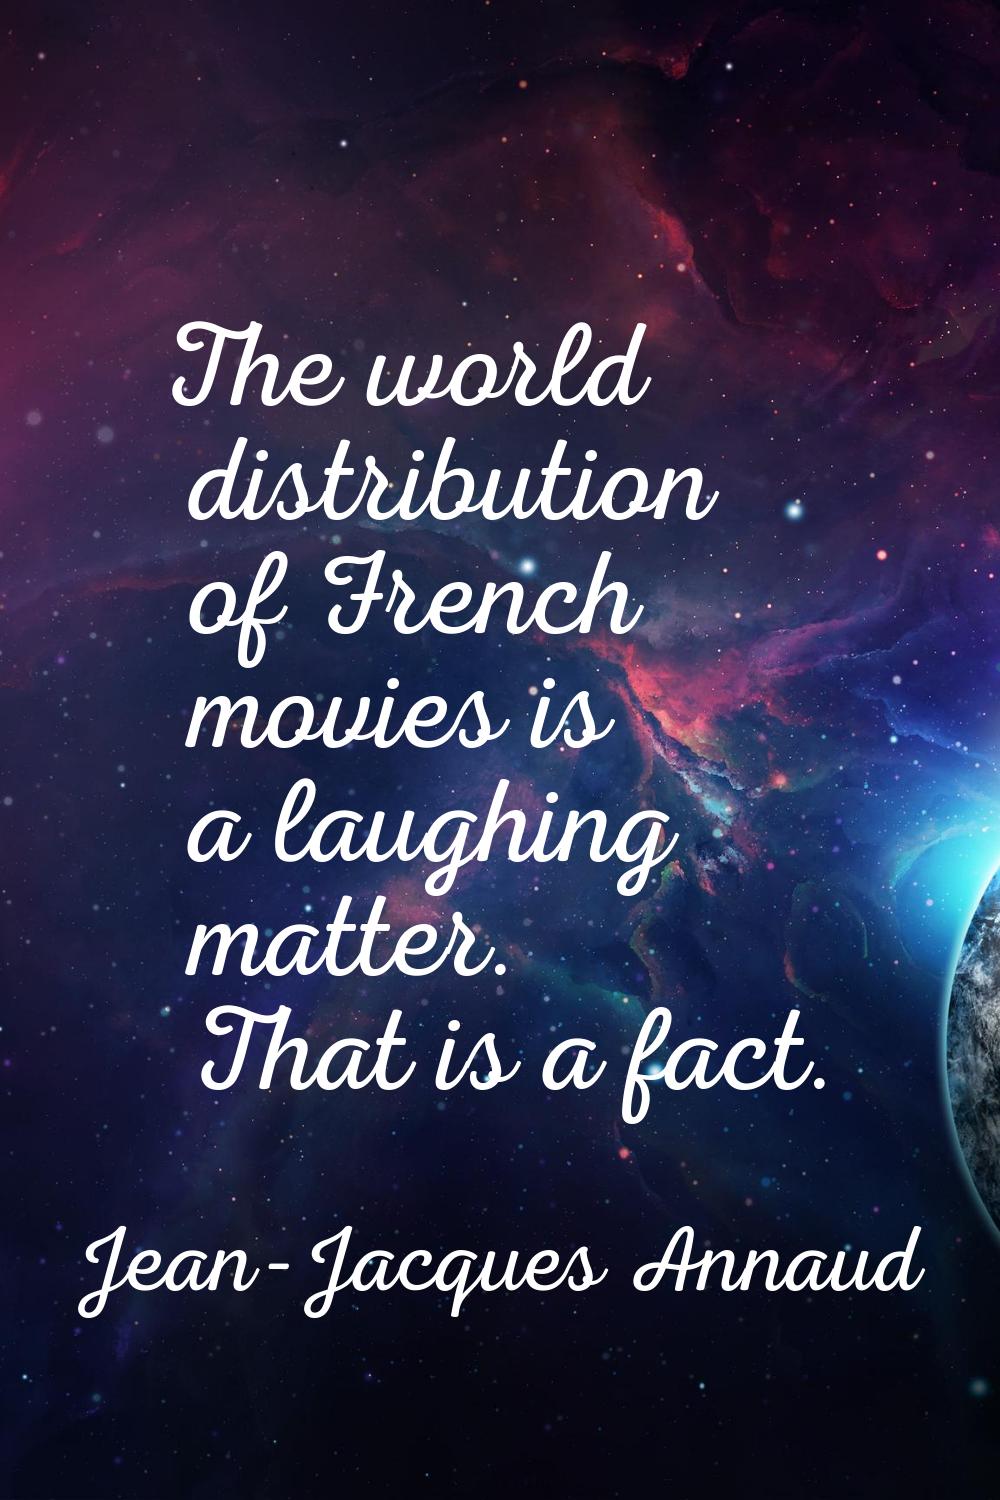 The world distribution of French movies is a laughing matter. That is a fact.